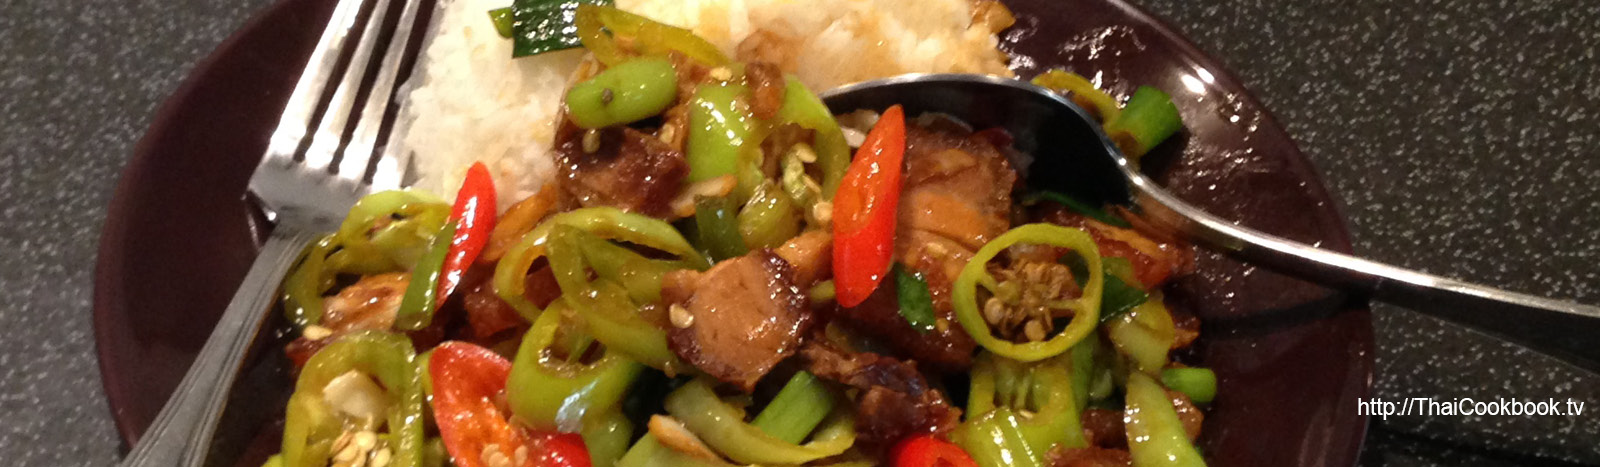 Authentic Thai recipe for Crispy Pork Belly with Peppers